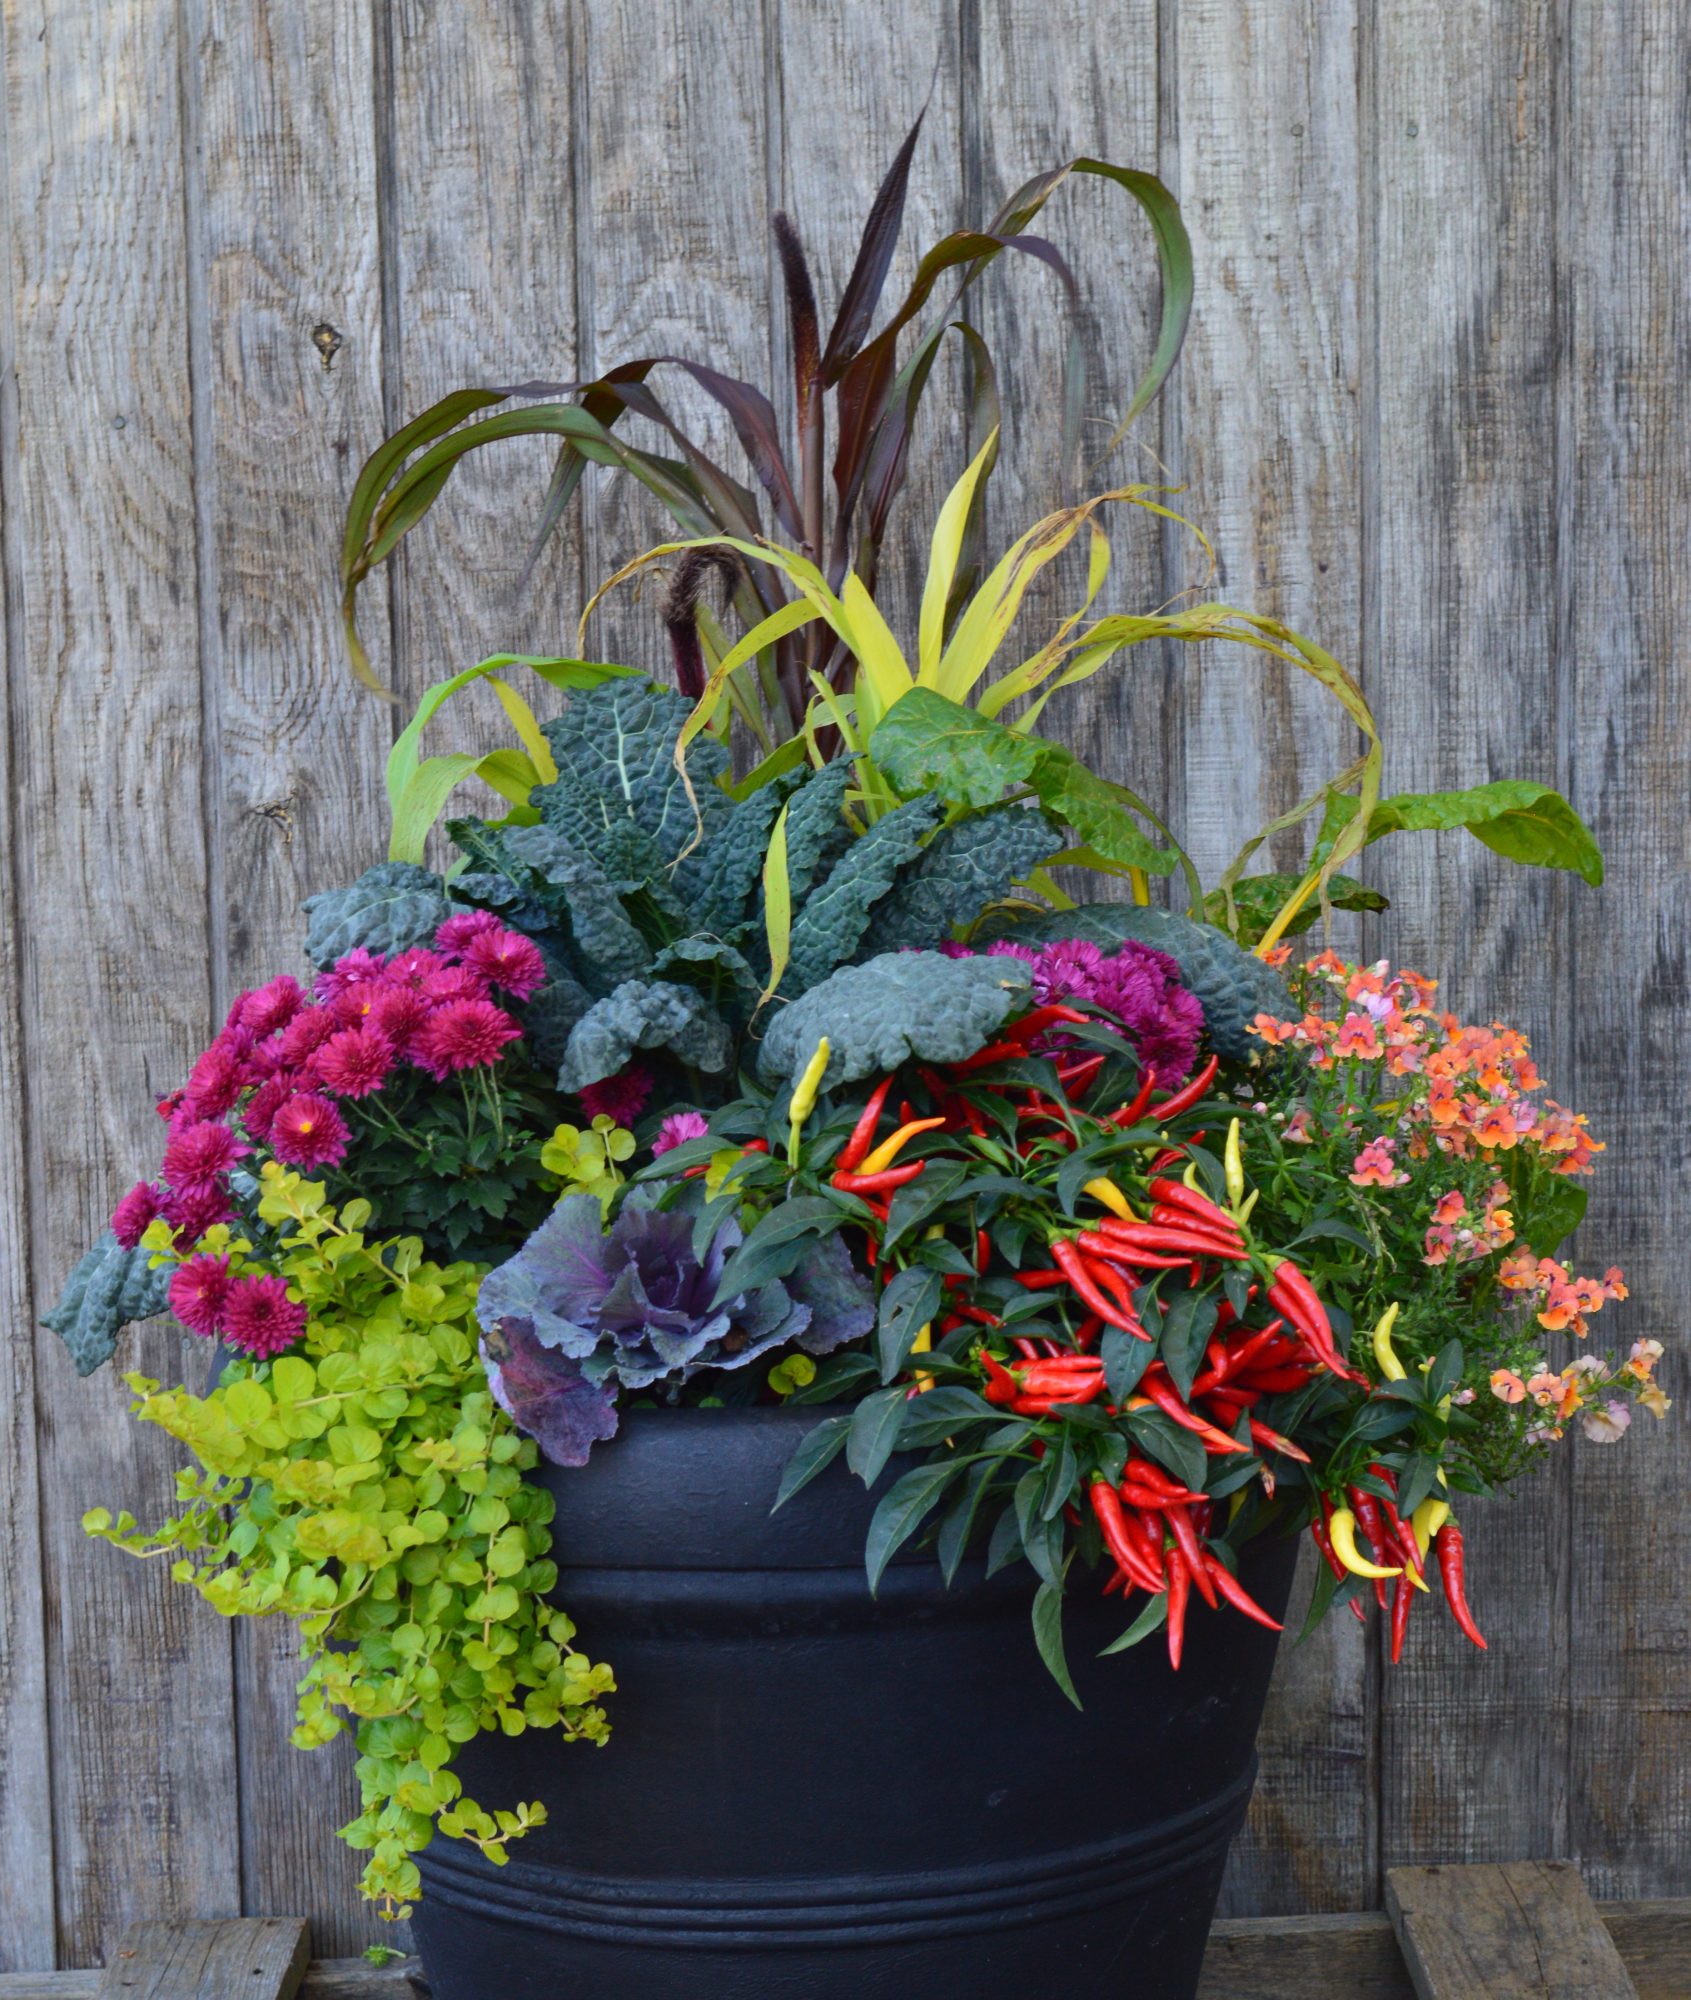 A large black container, filled with greenery and colorful flowers